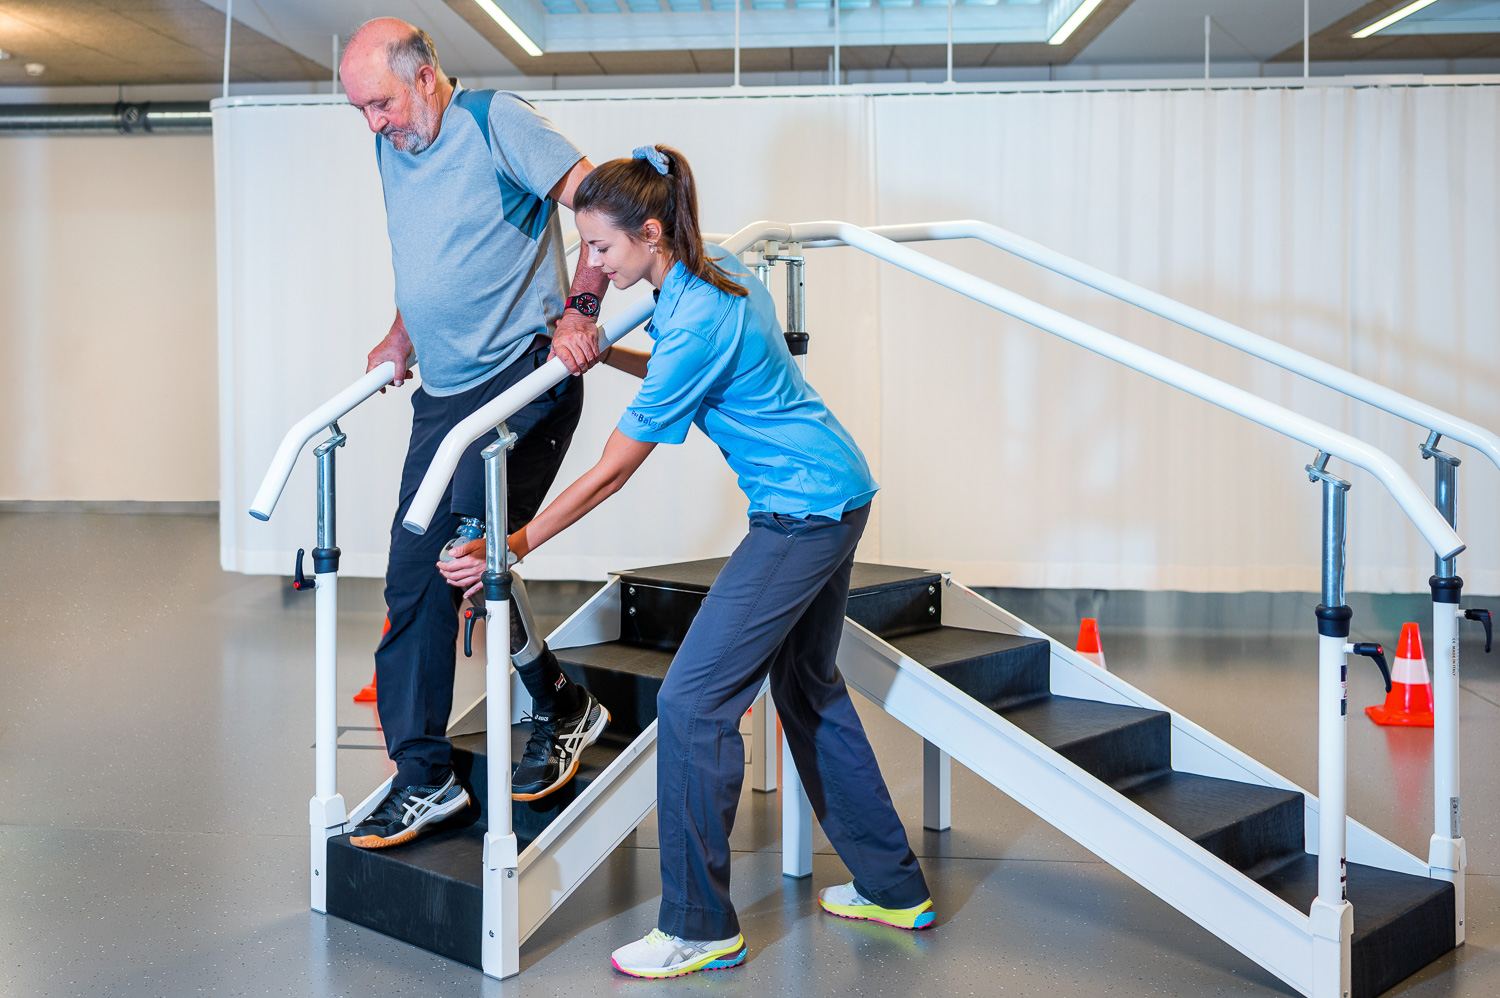 In a walking course, the patient learns to descend stairs with his prosthetic thigh with the help of the physiotherapist.